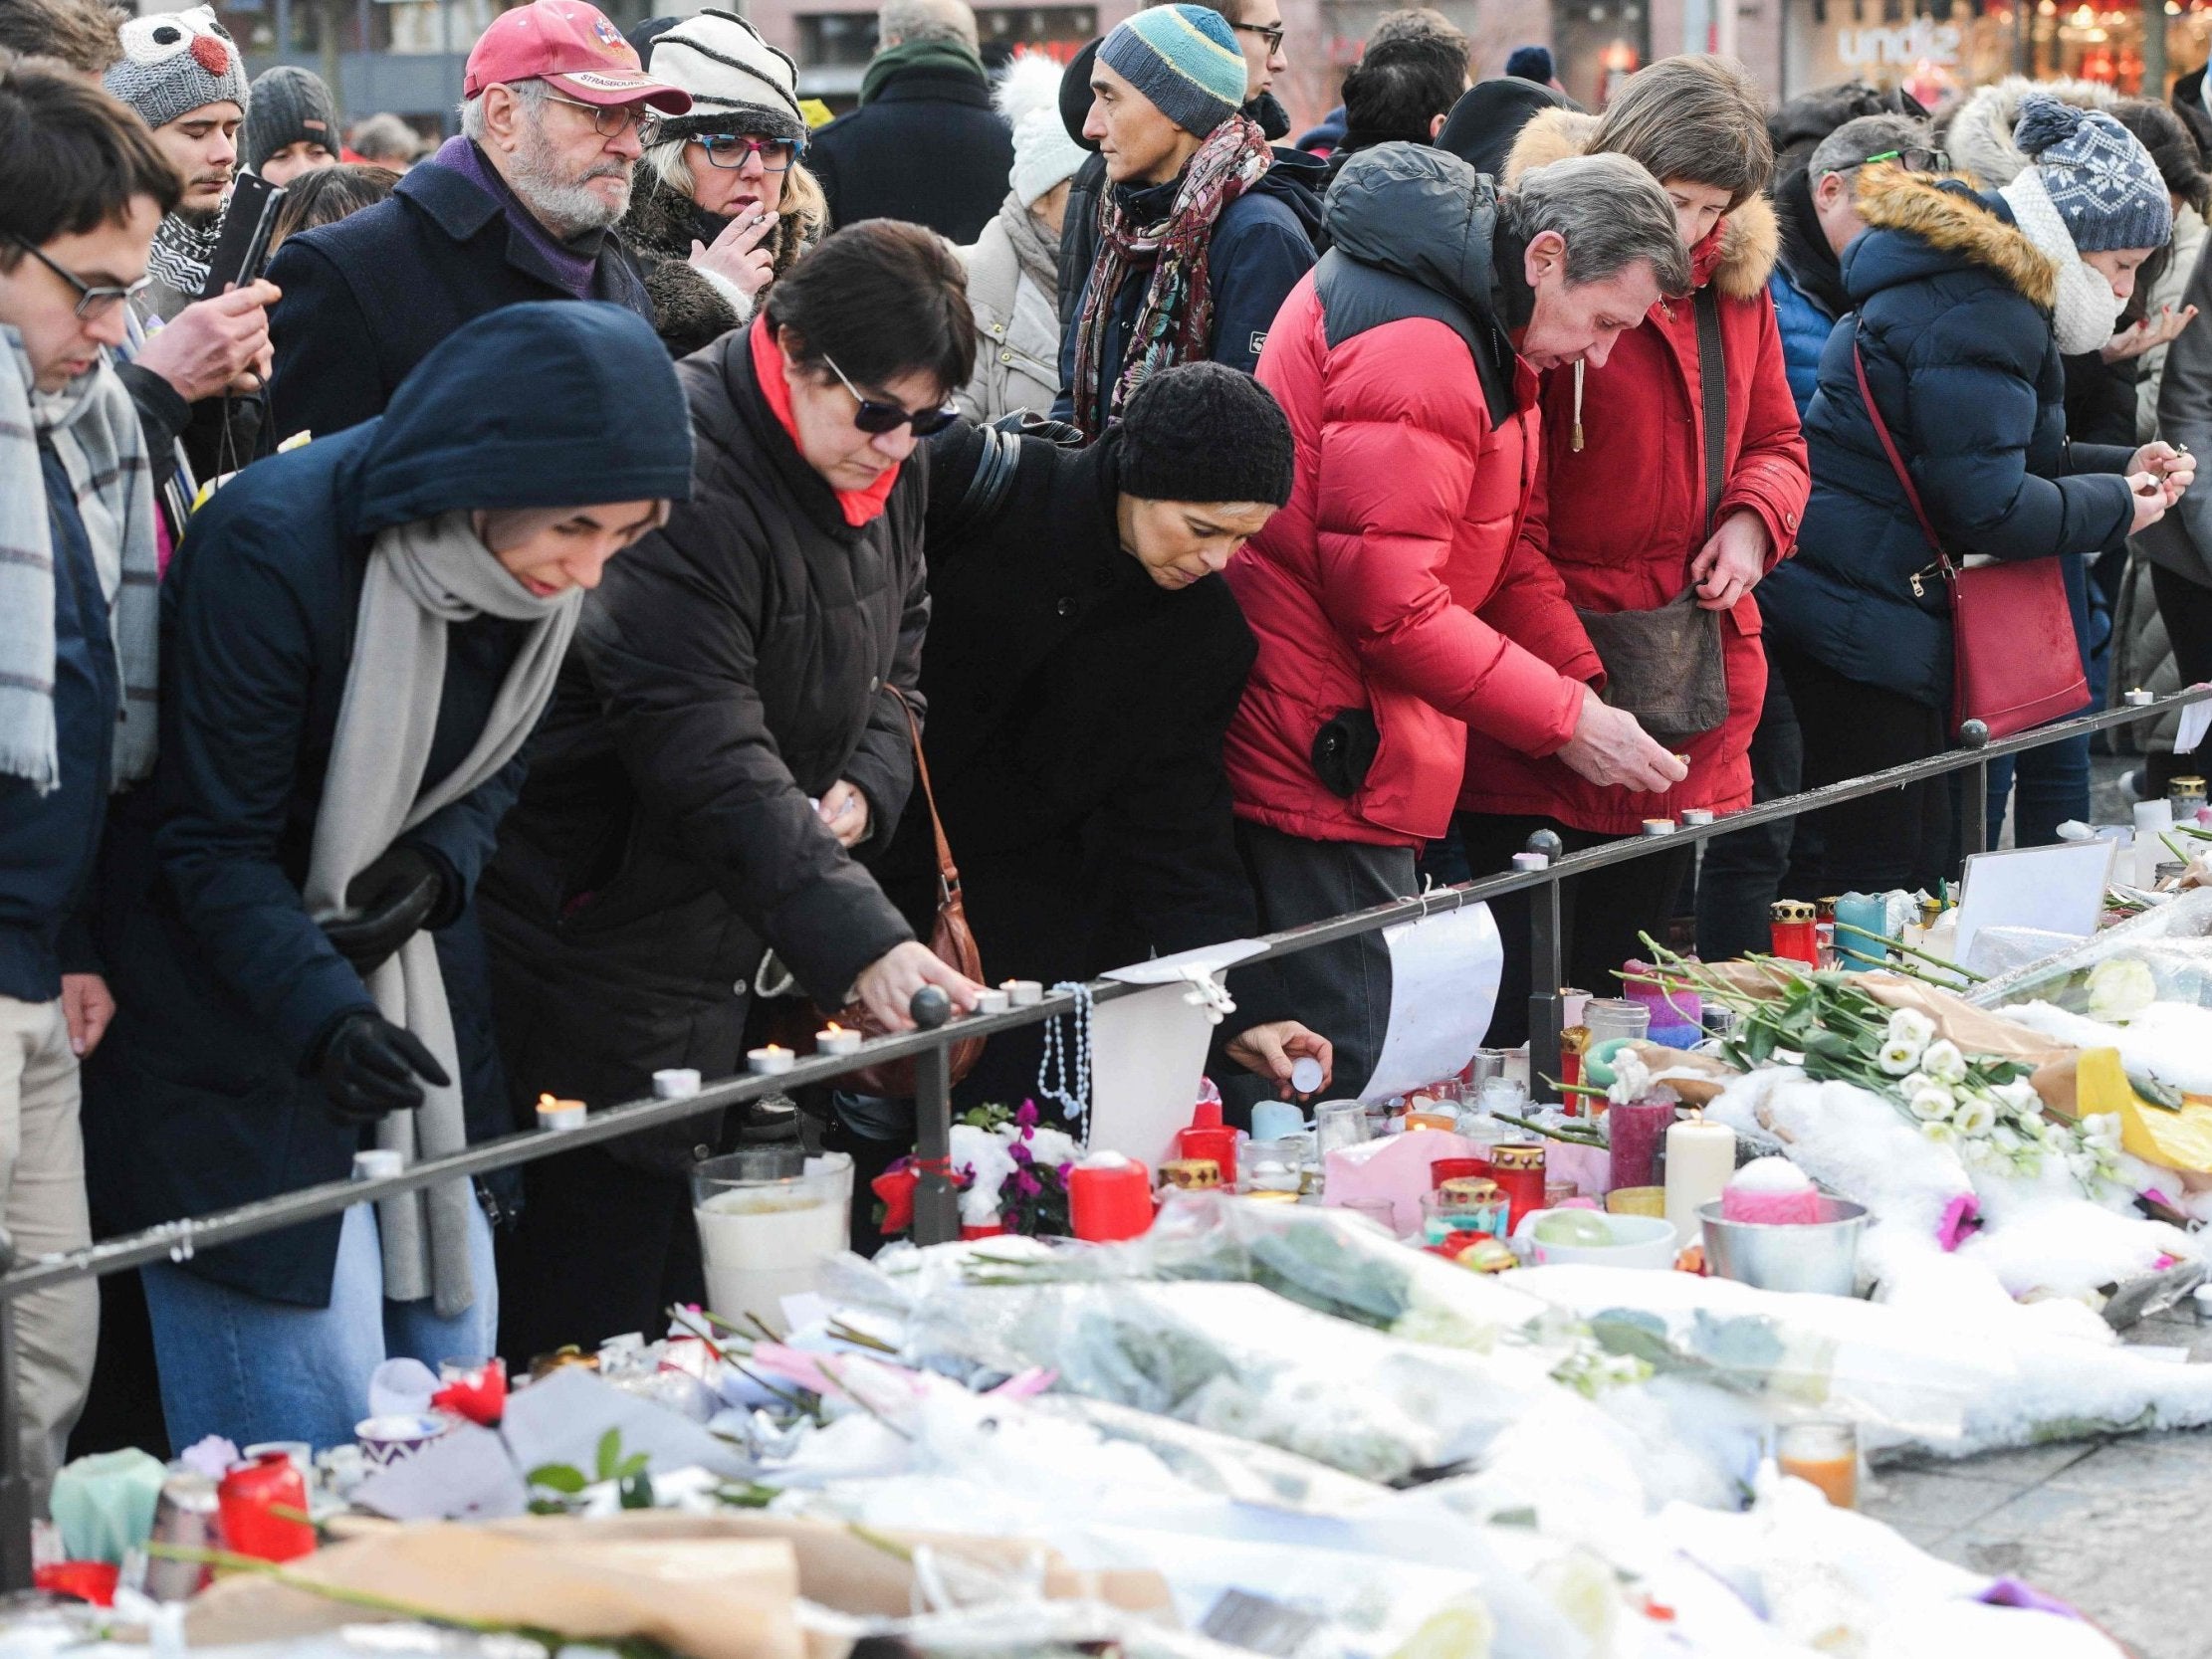 People light candles and lay floral tributes during a gathering around a makeshift memorial at Place Kleber, Strasbourg, on 16 December (AFP/Getty)